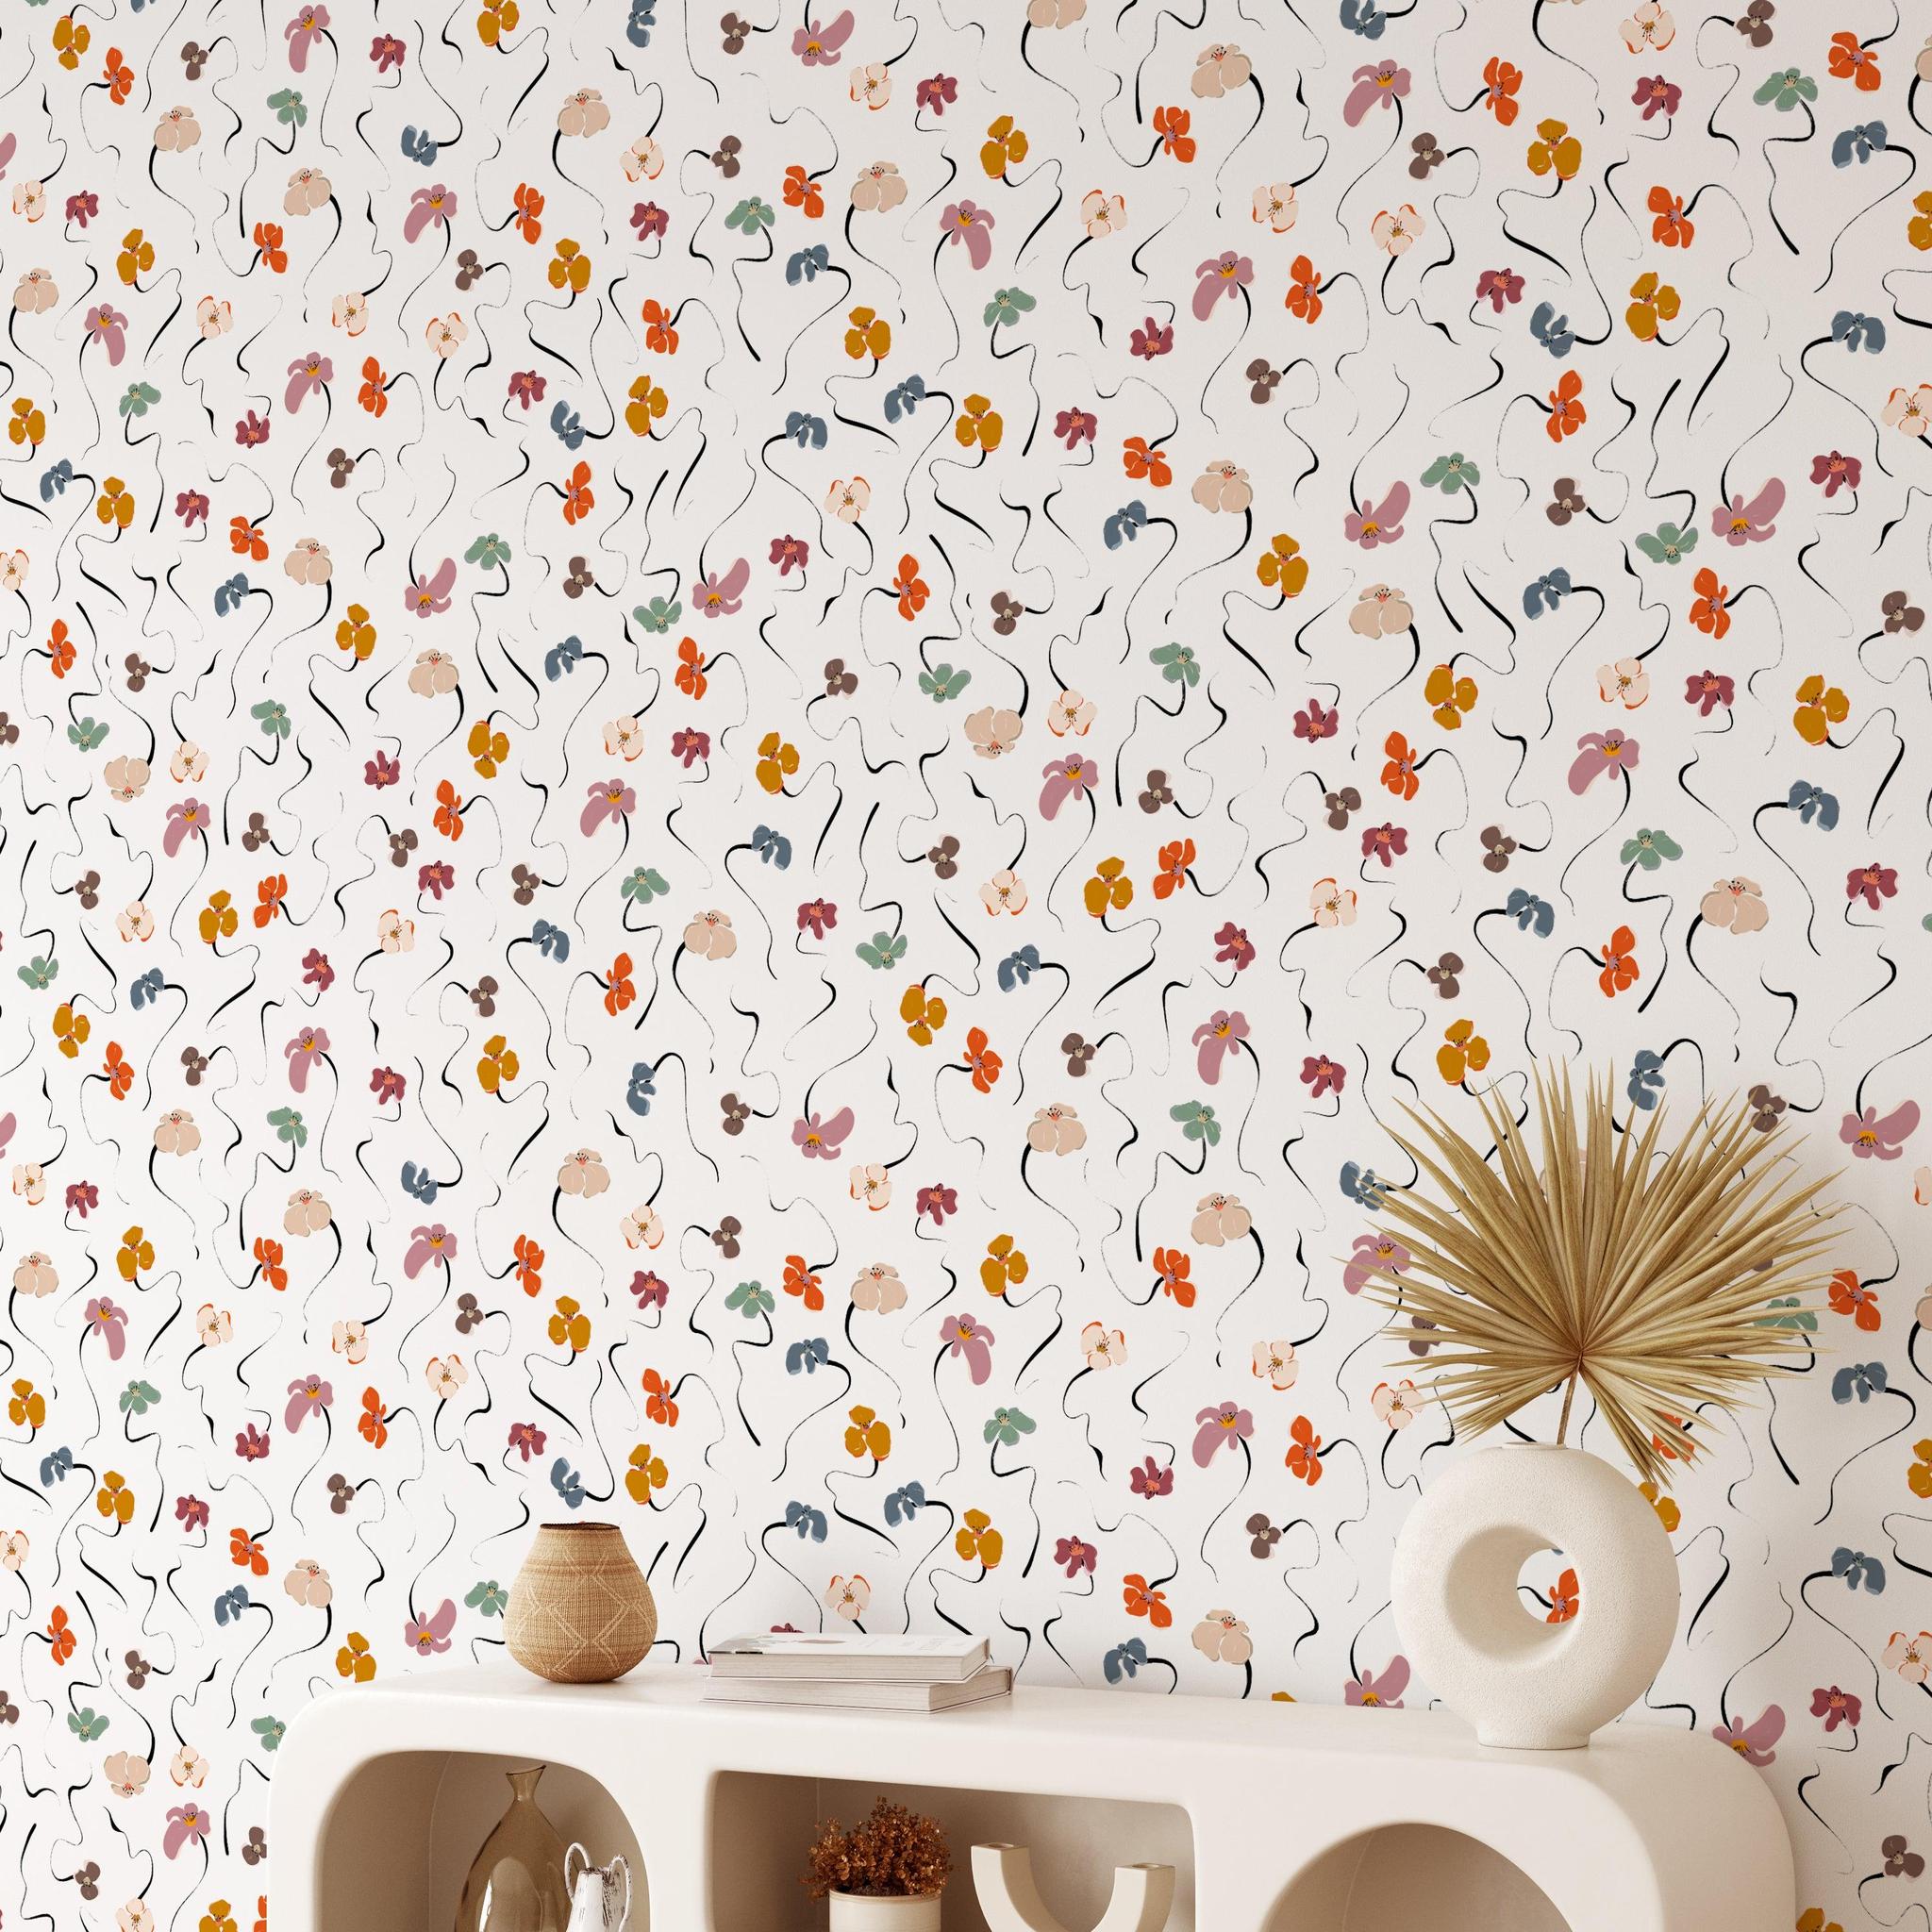 Dream On Wallpaper by Wall Blush SG02 in a stylish living room setting, featuring vibrant botanical pattern as the focal point.
